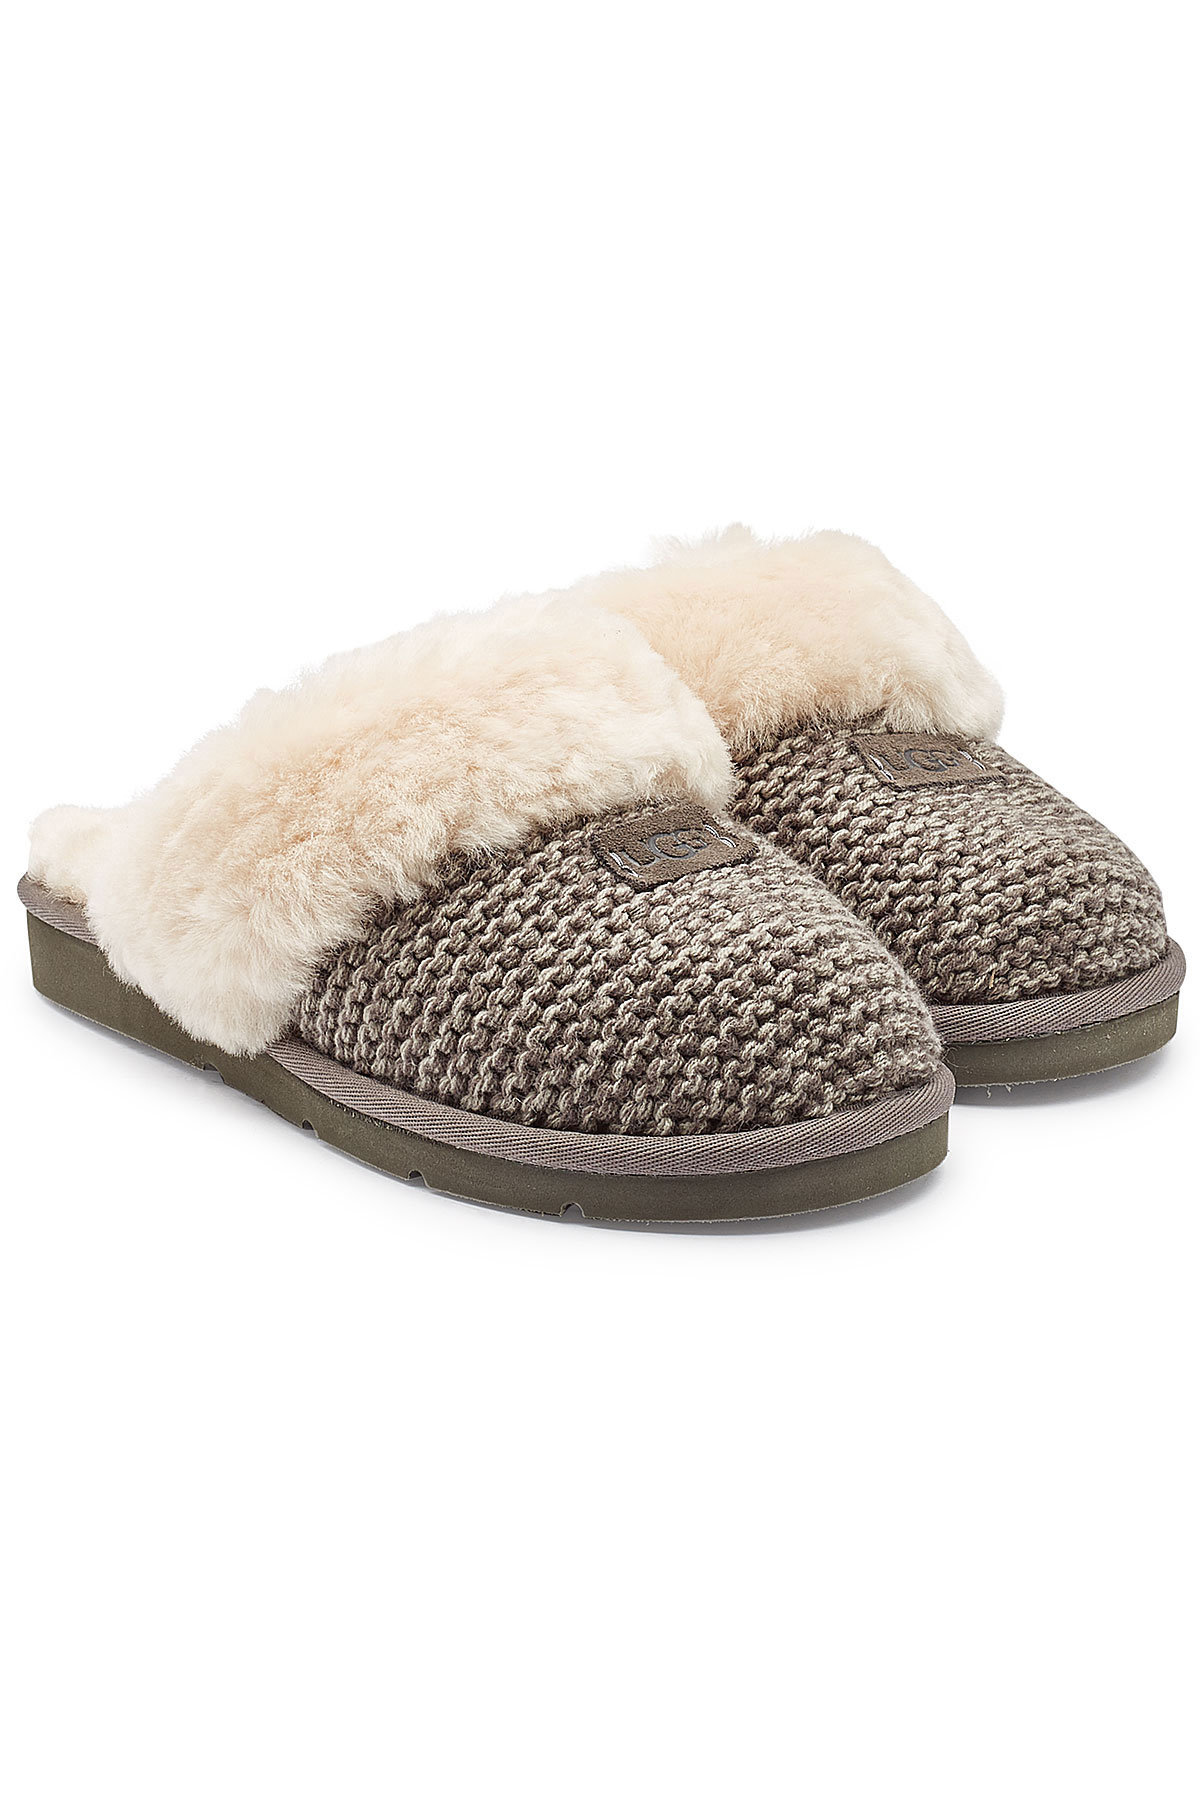 ugg cozy cable knit slippers